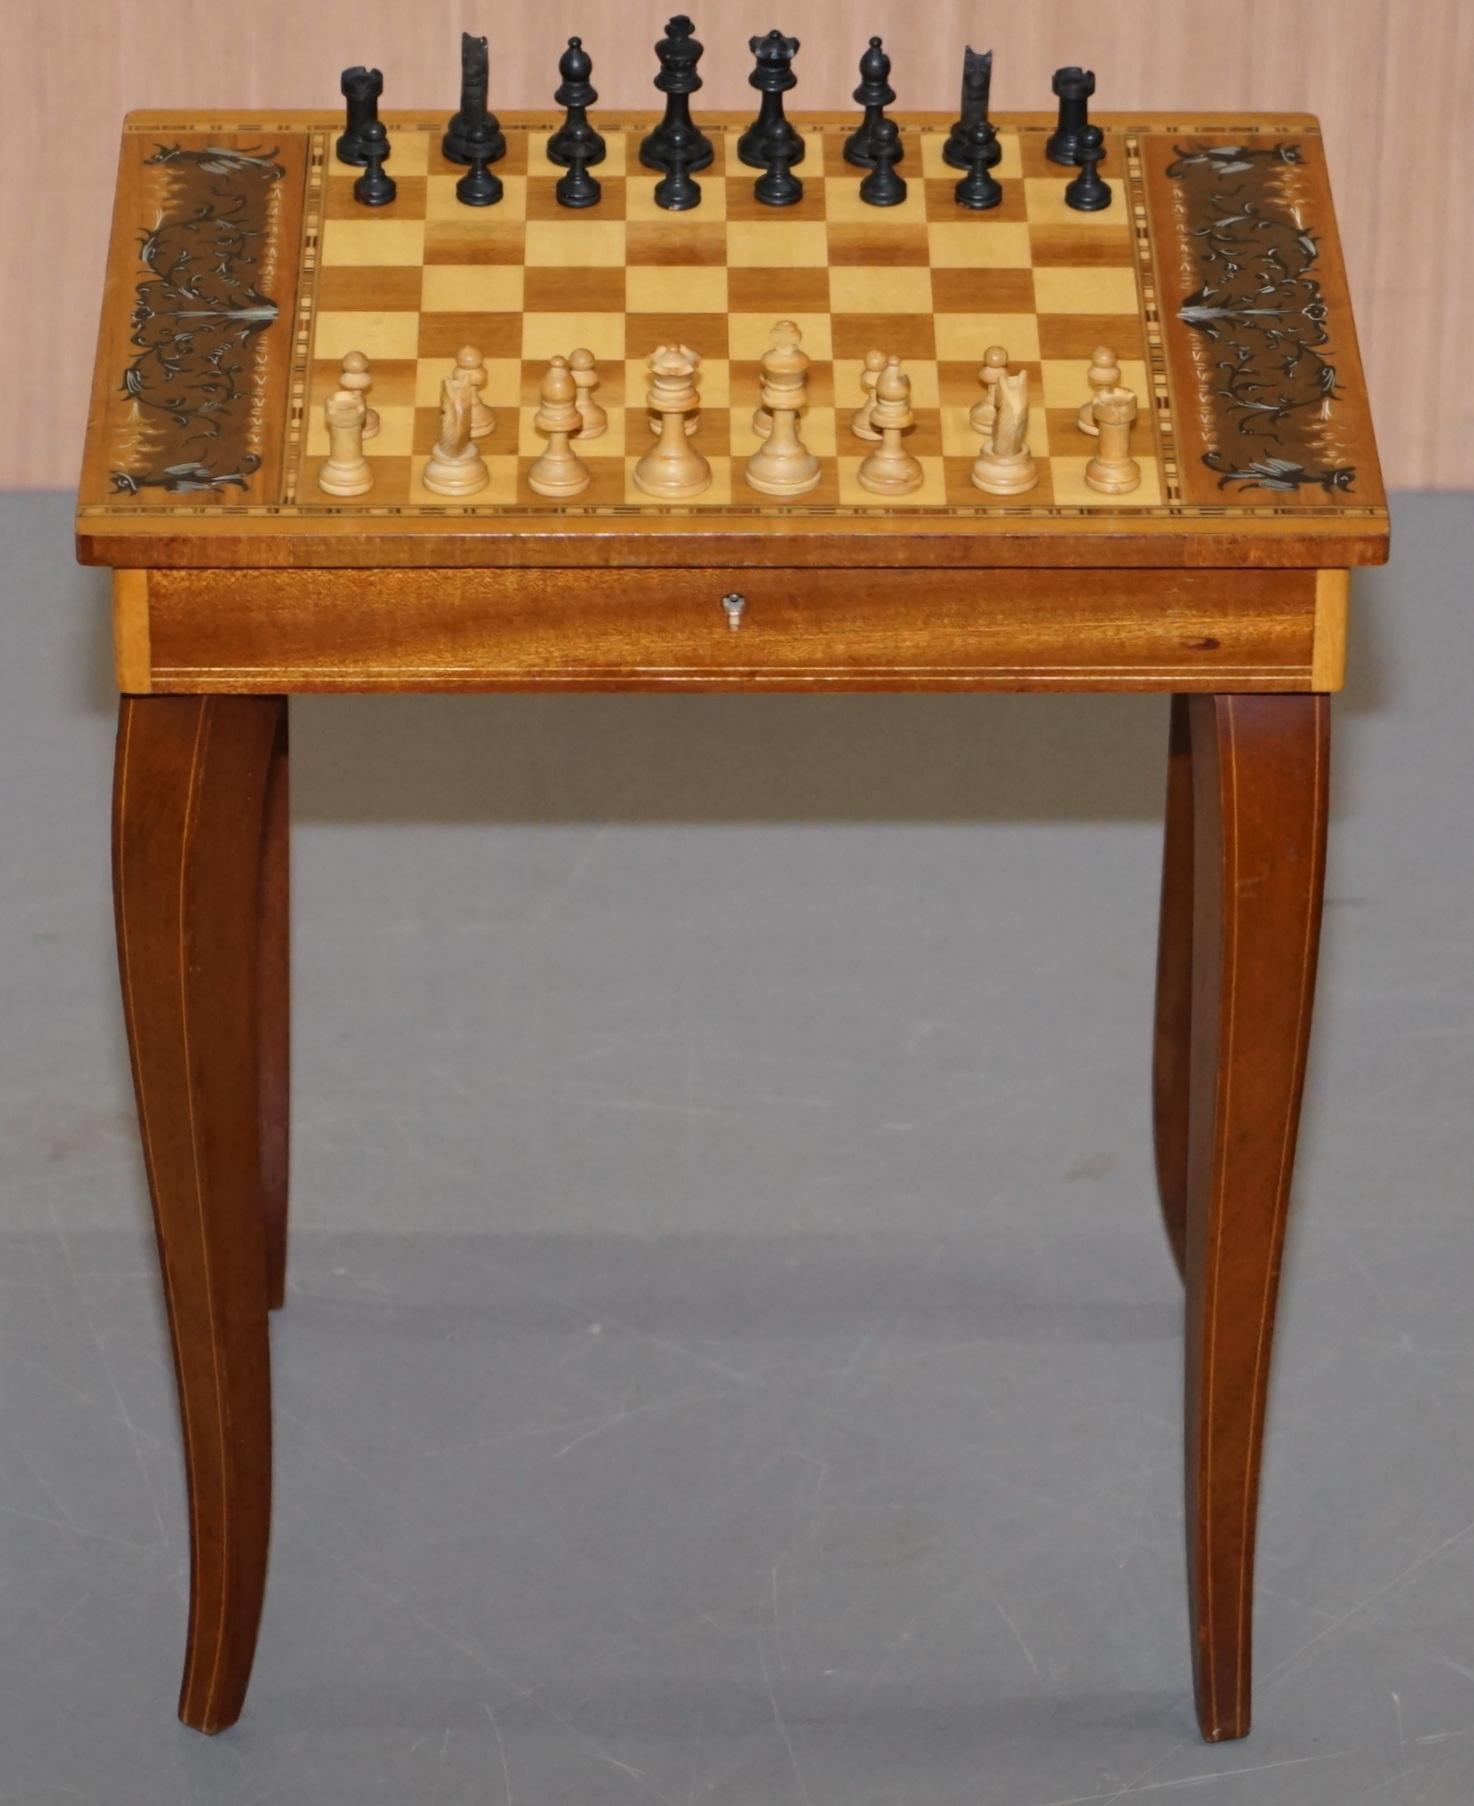 Lovely Small Musical Chess Backgammon Games Table with Drawer and Chess Pieces 2